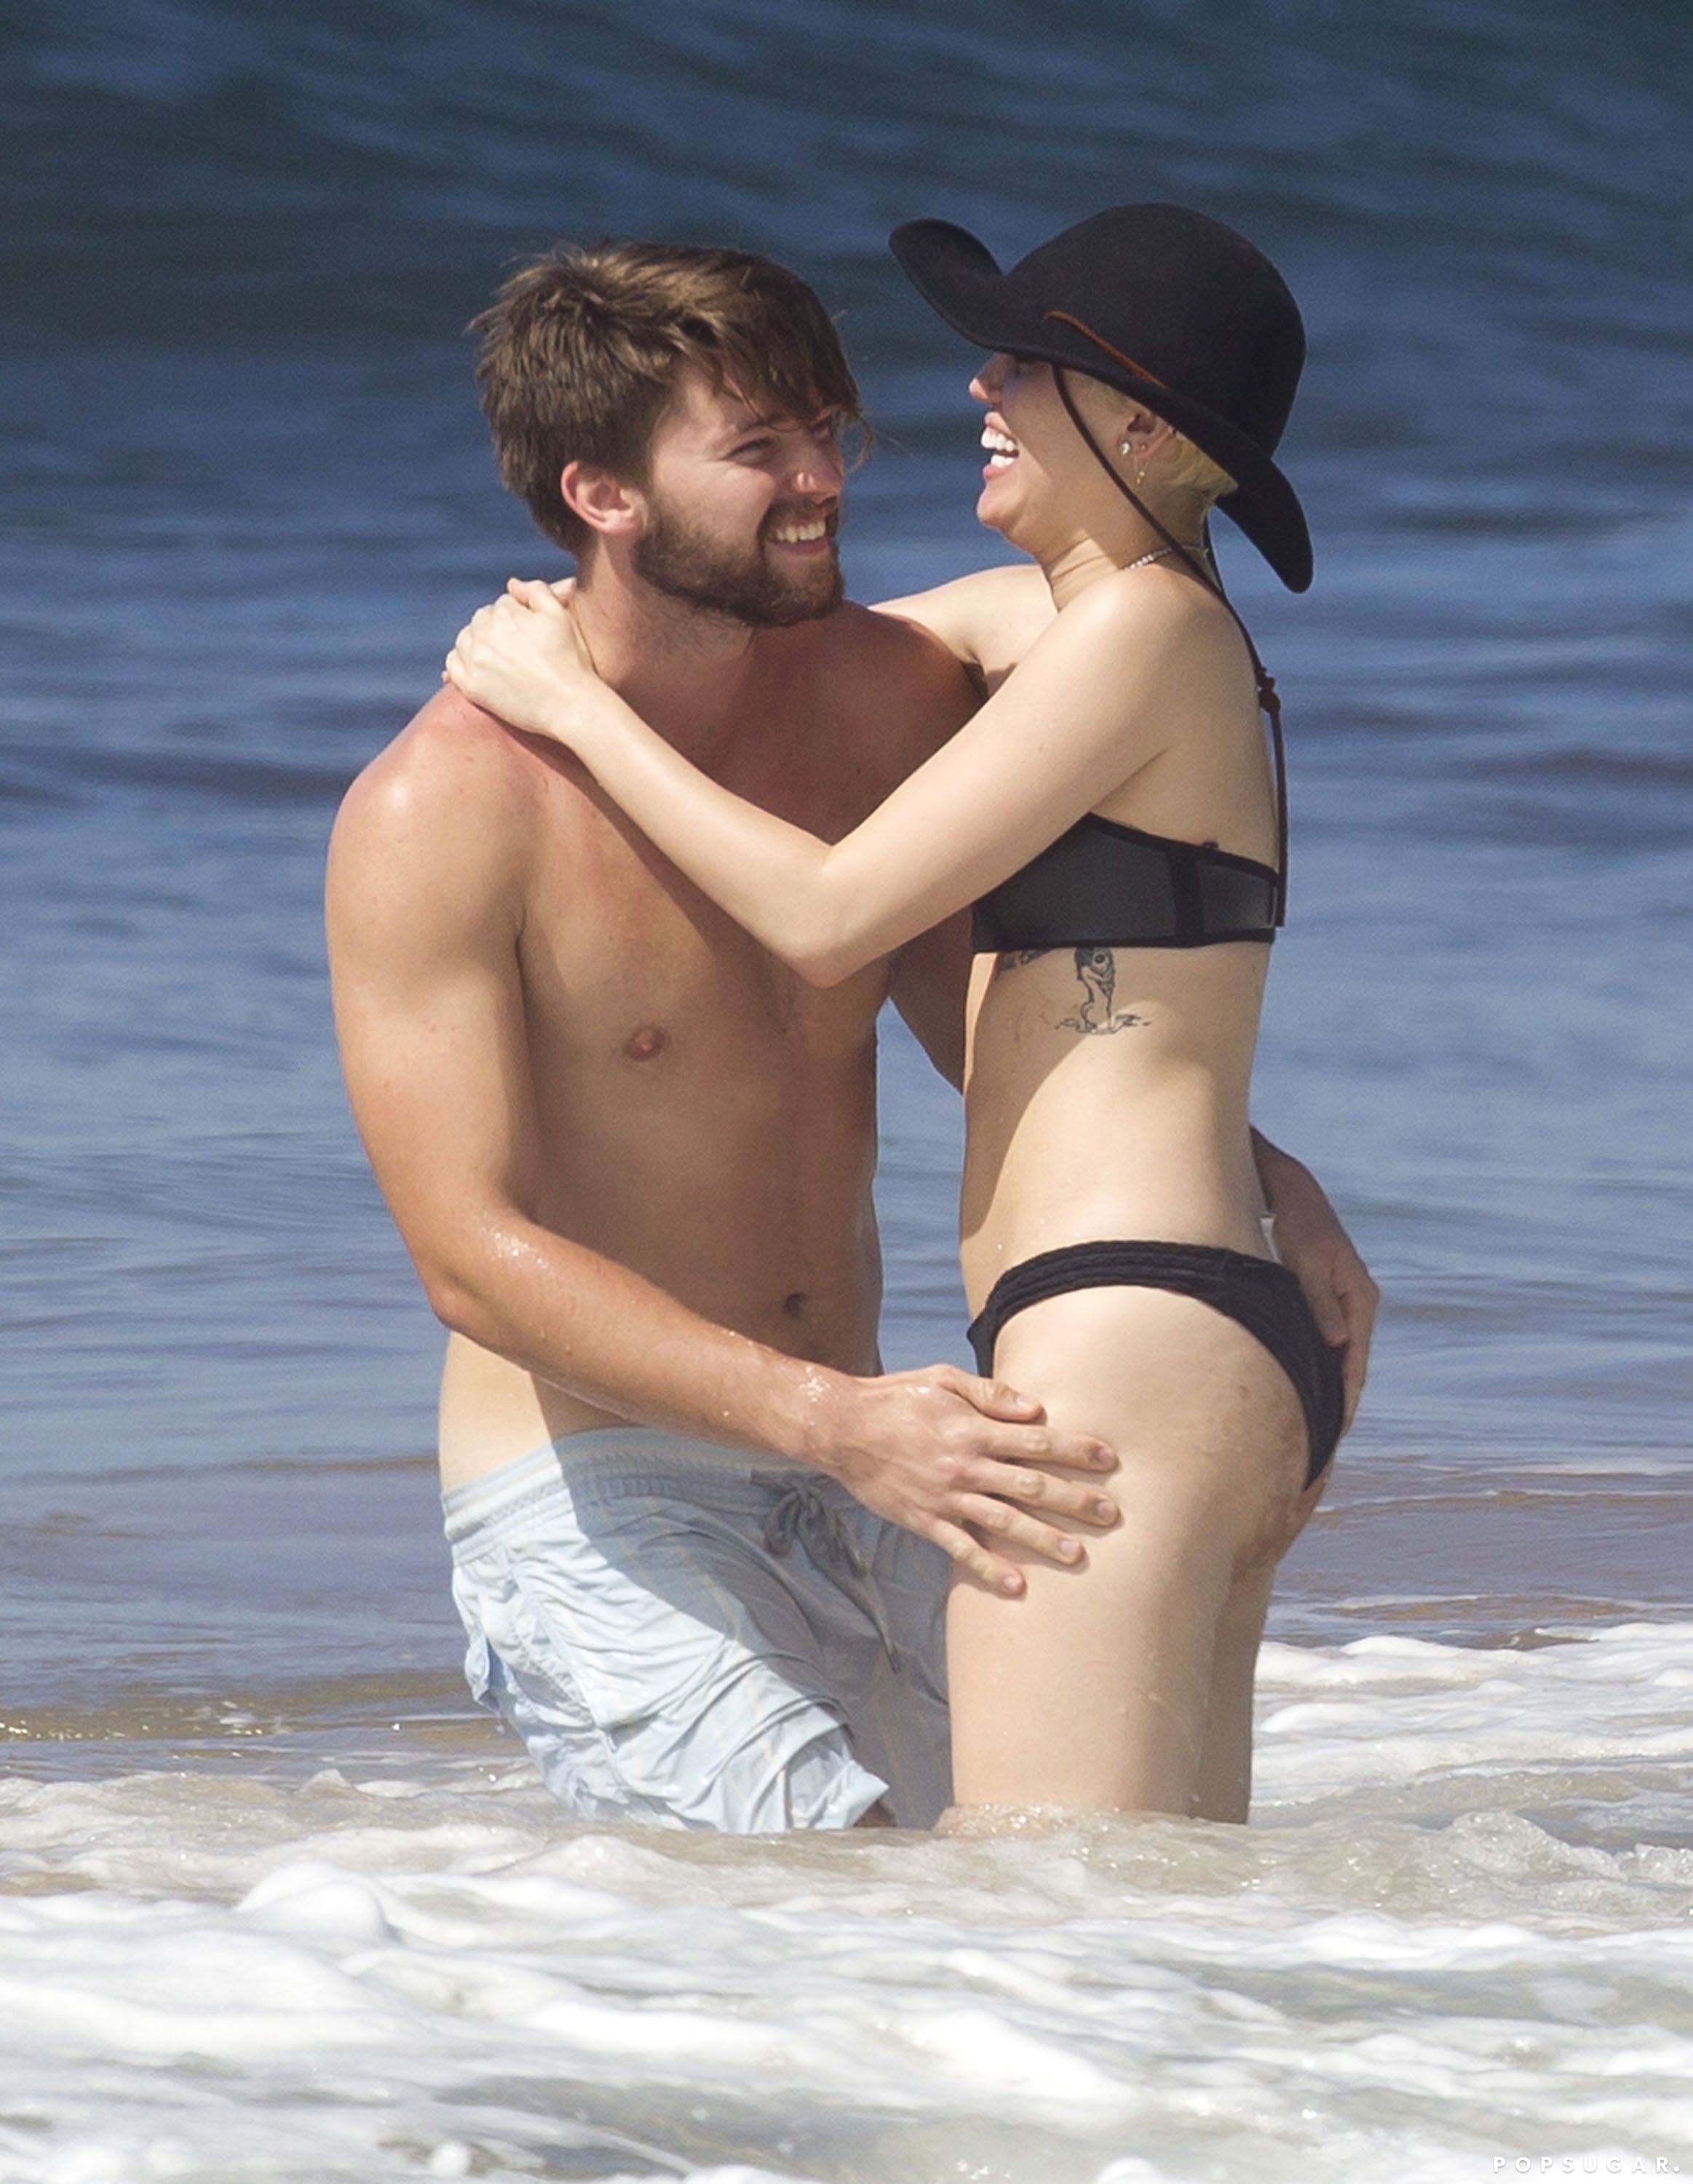 Best of Miley cyrus in maui